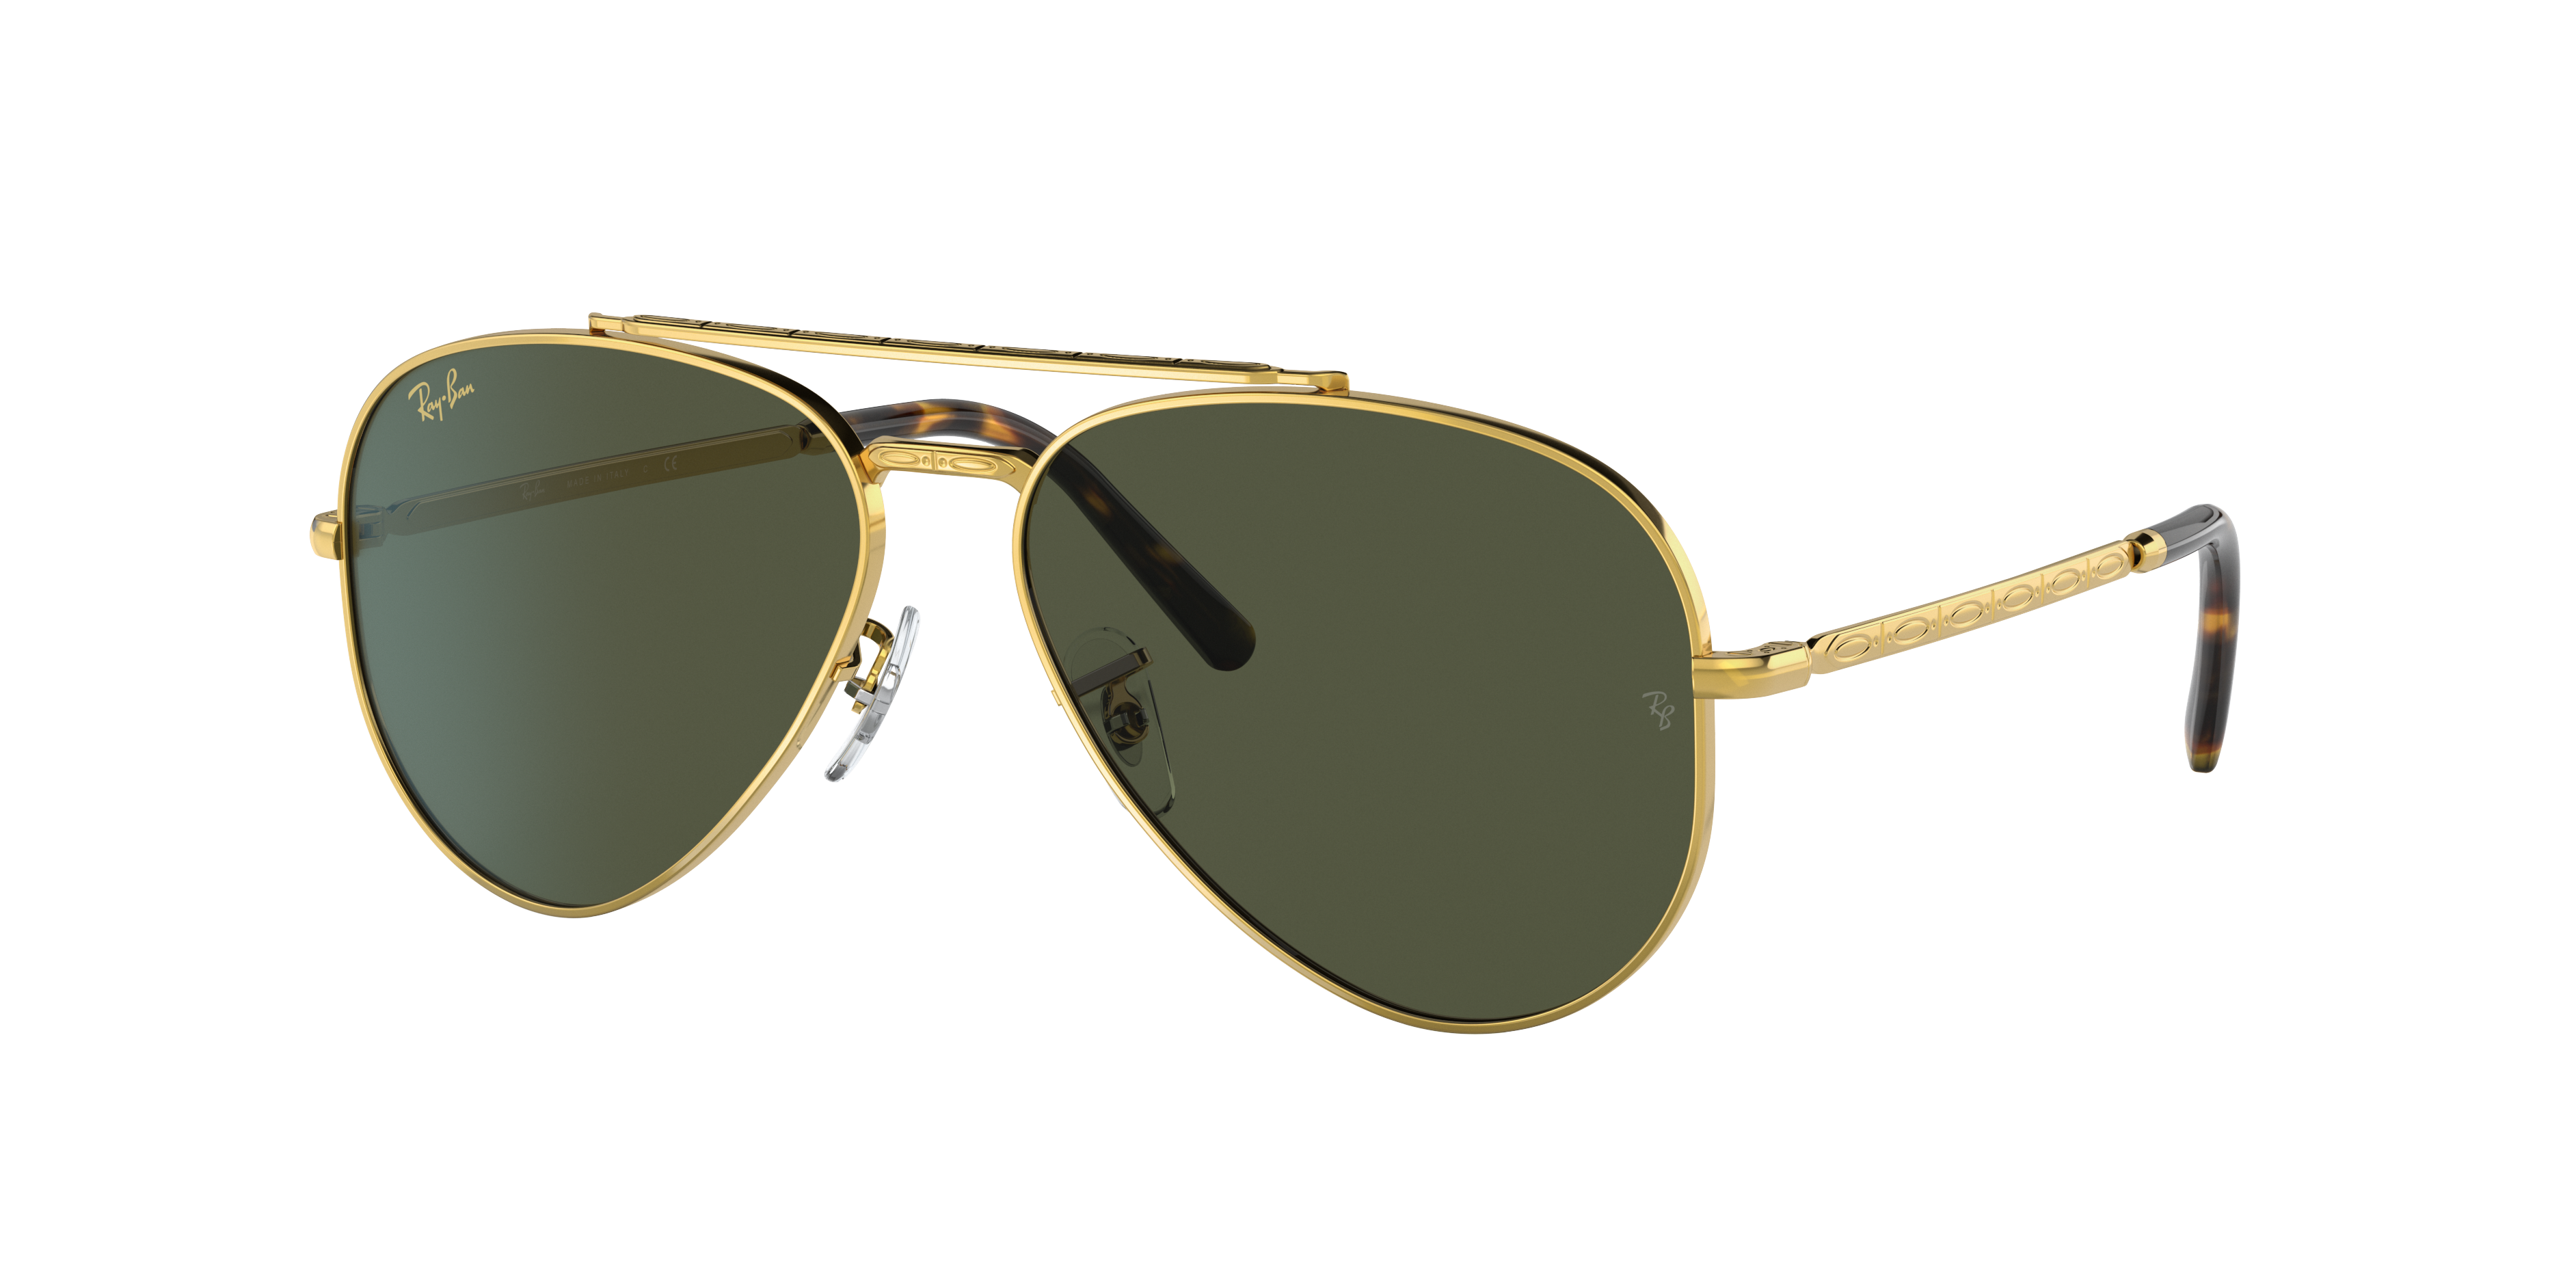 New Aviator Sunglasses in Gold and Green | Ray-Ban®